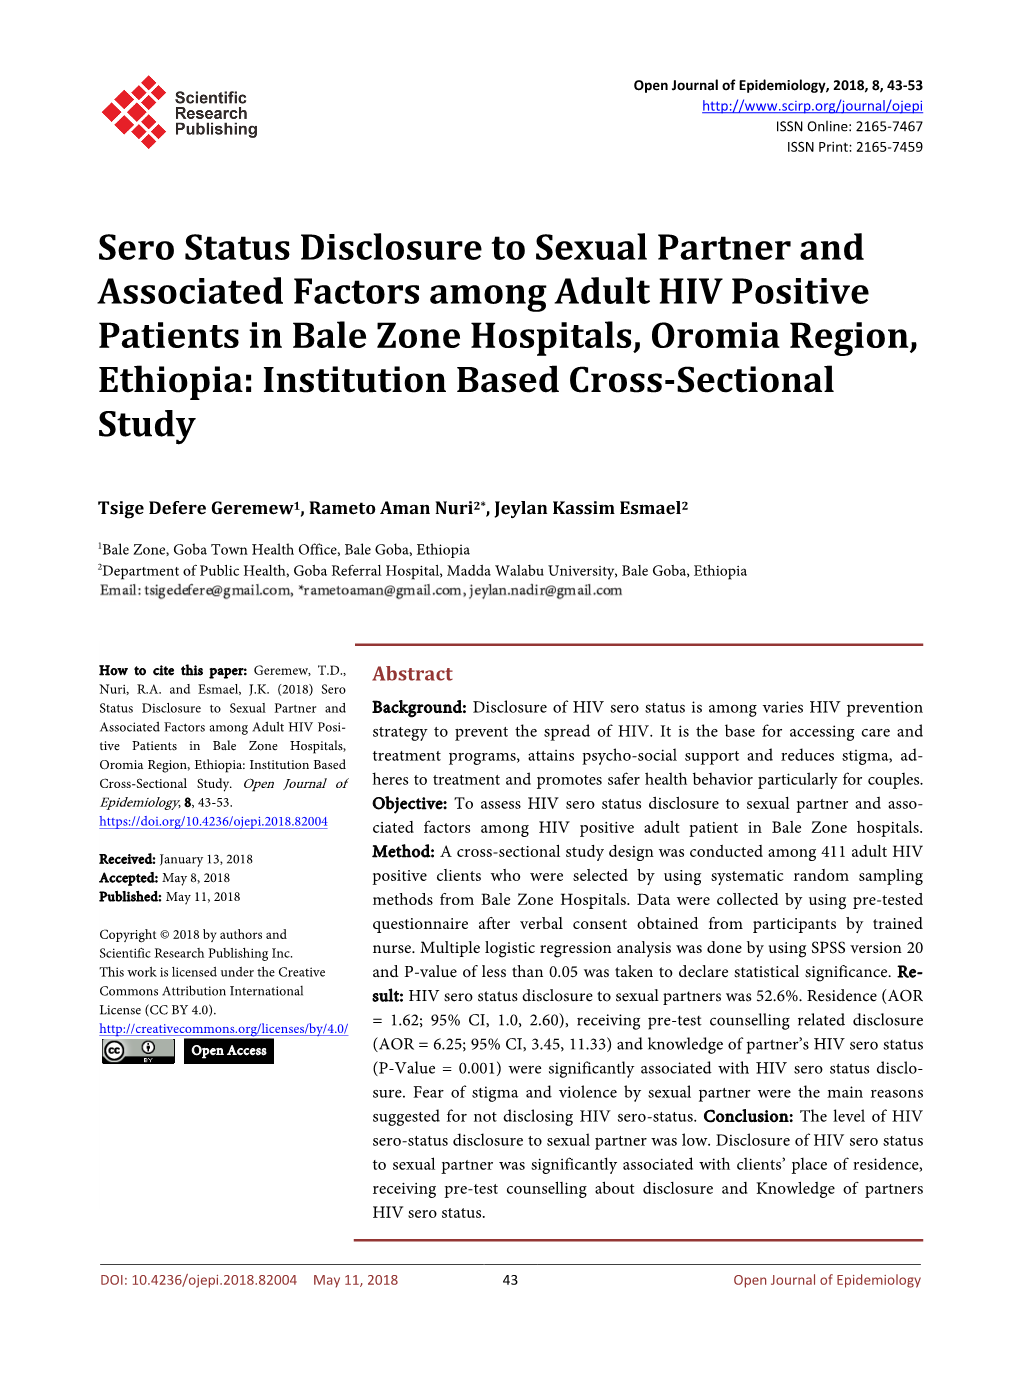 Sero Status Disclosure to Sexual Partner and Associated Factors Among Adult HIV Positive Patients in Bale Zone Hospitals, Oromia